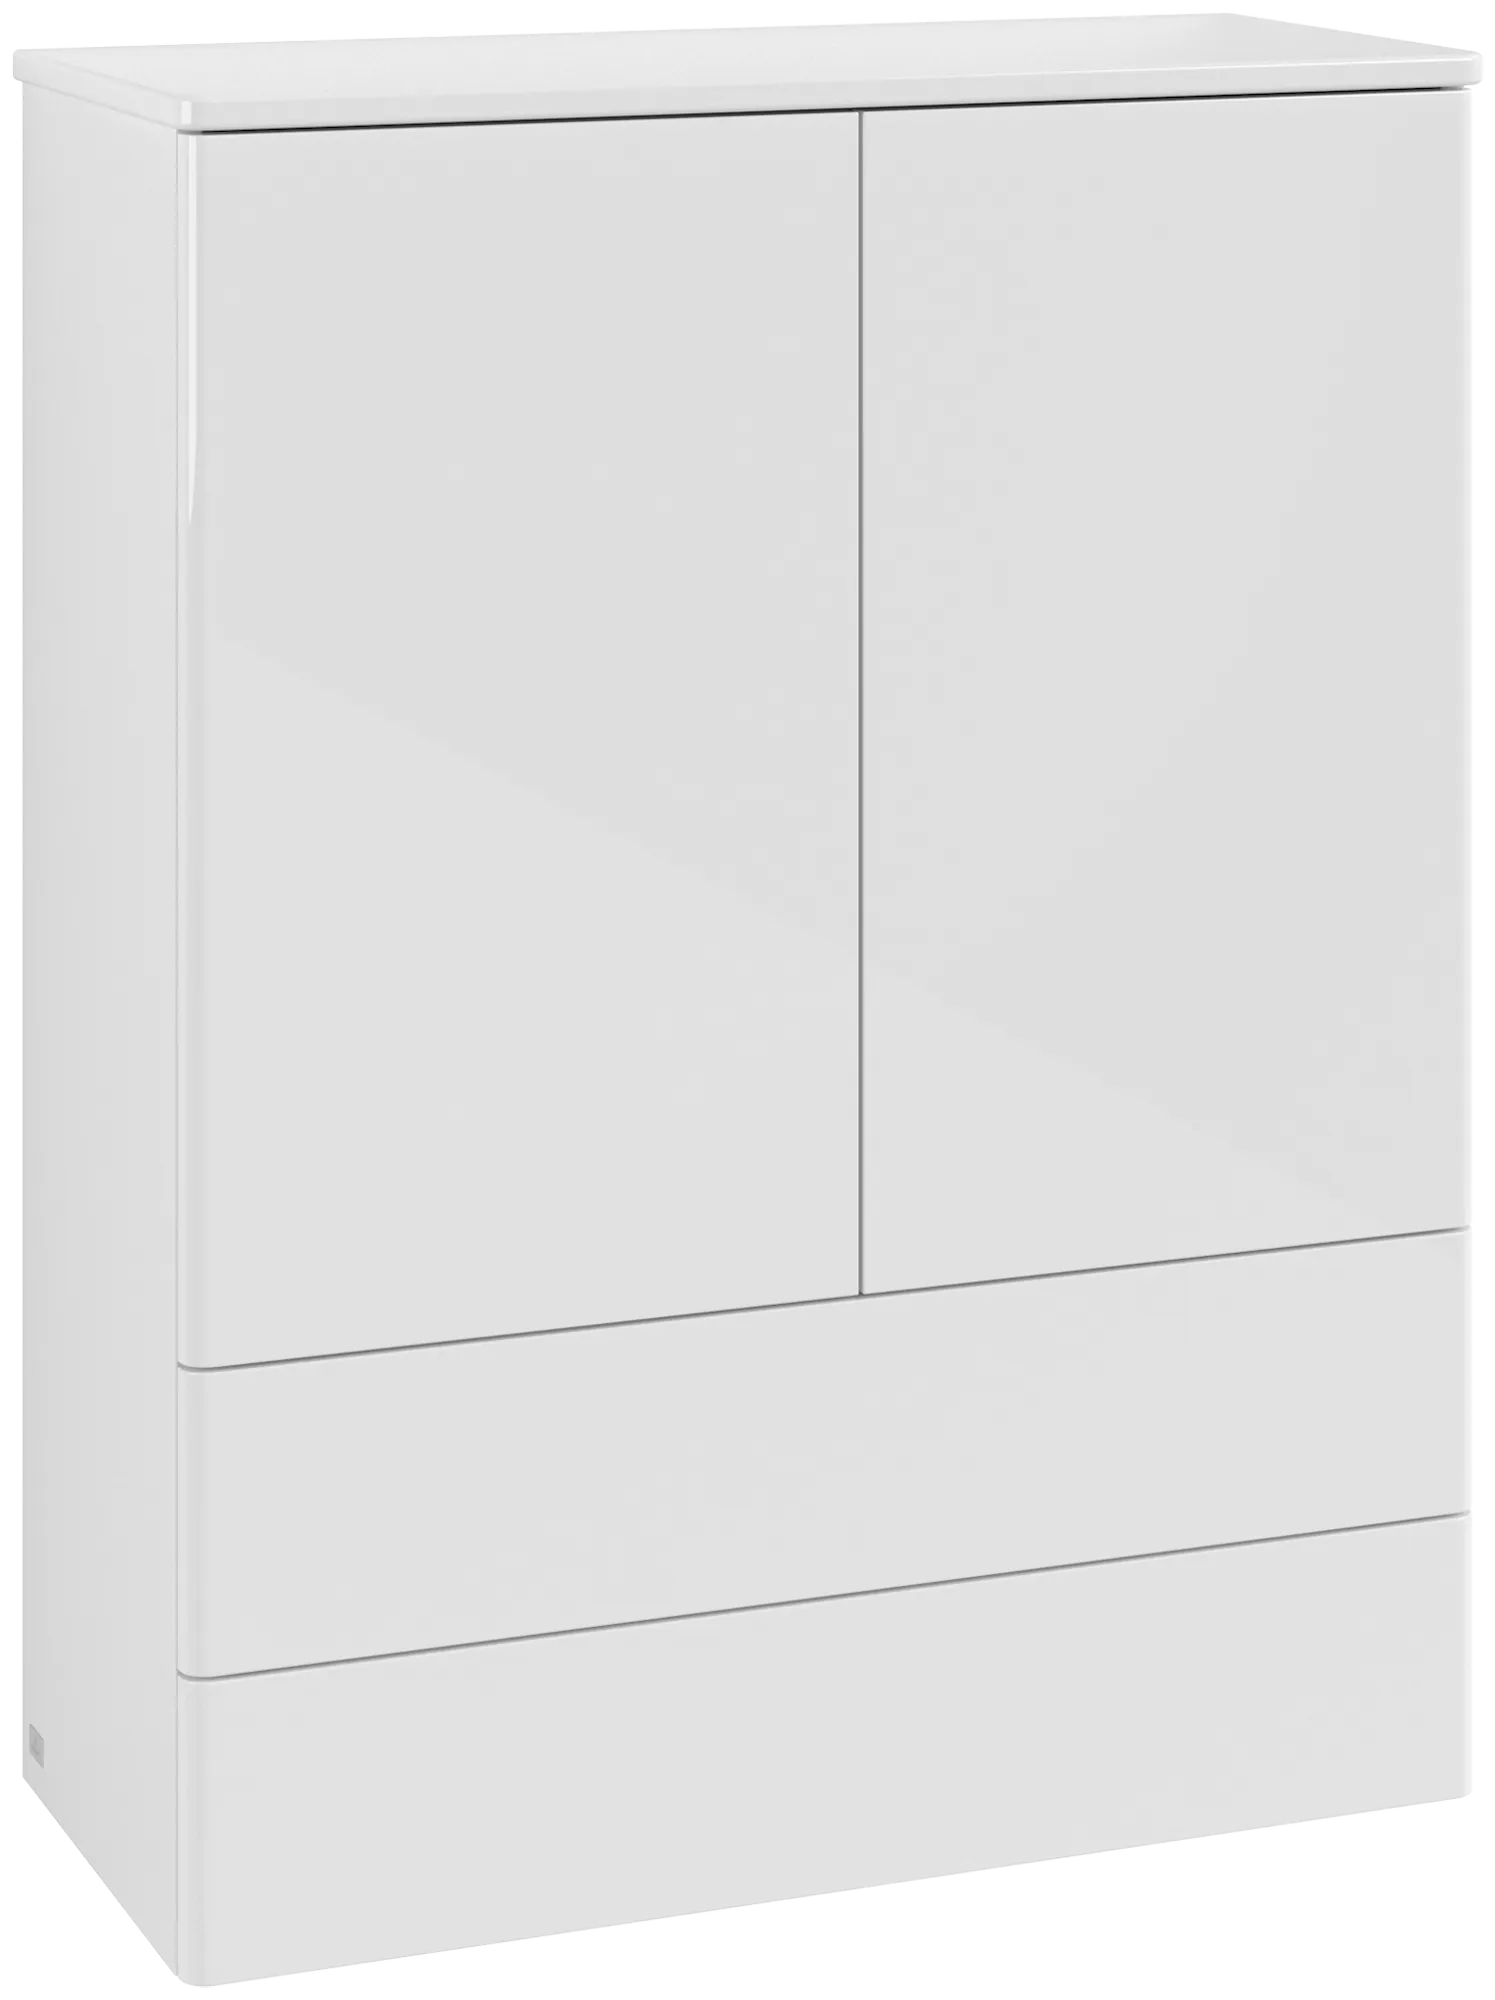 VILLEROY BOCH Antao Highboard, with lighting, 2 doors, 814 x 1039 x 356 mm, Front without structure, Glossy White Lacquer / Glossy White Lacquer #L47000GF resmi